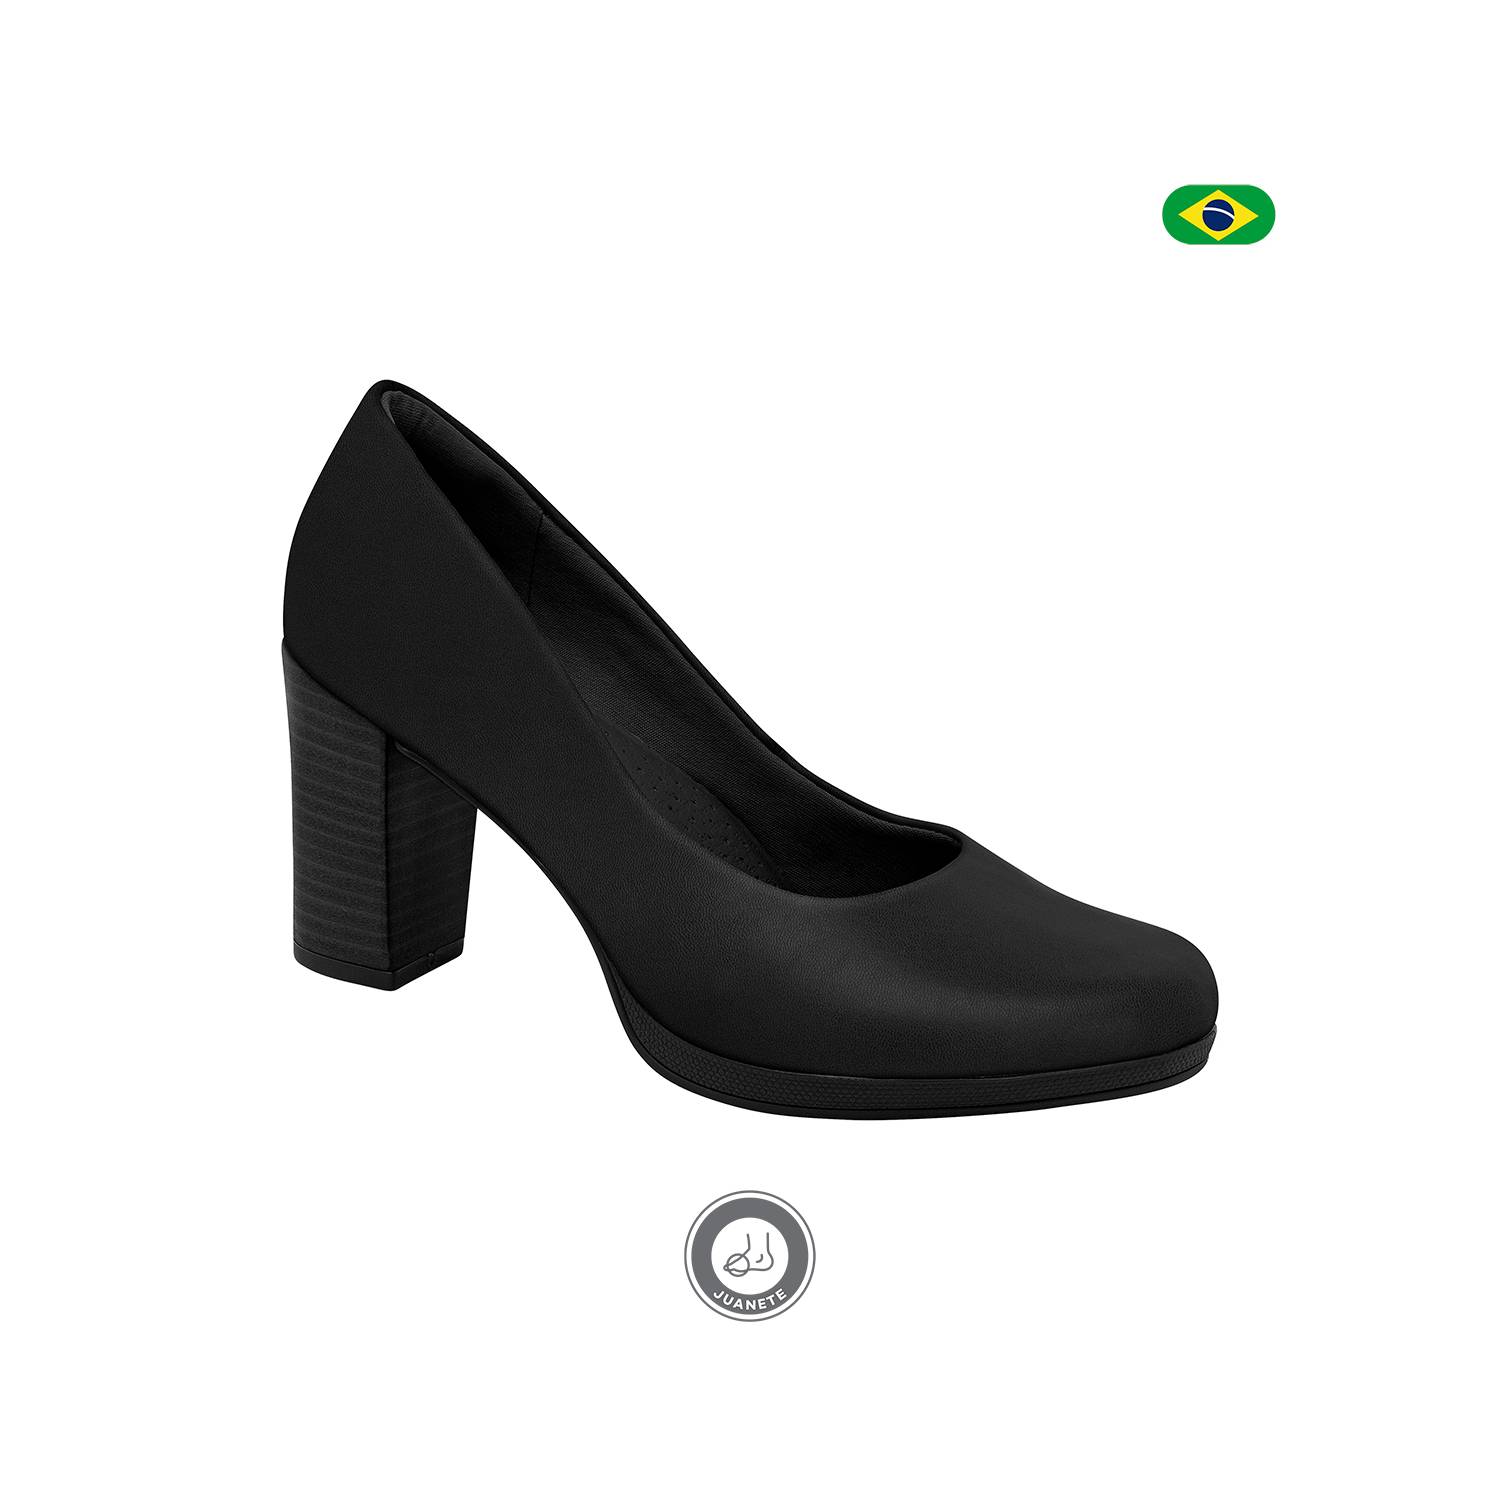 Zapatos Mujer 130185-PRET Piccadilly PICCADILLY | falabella.com